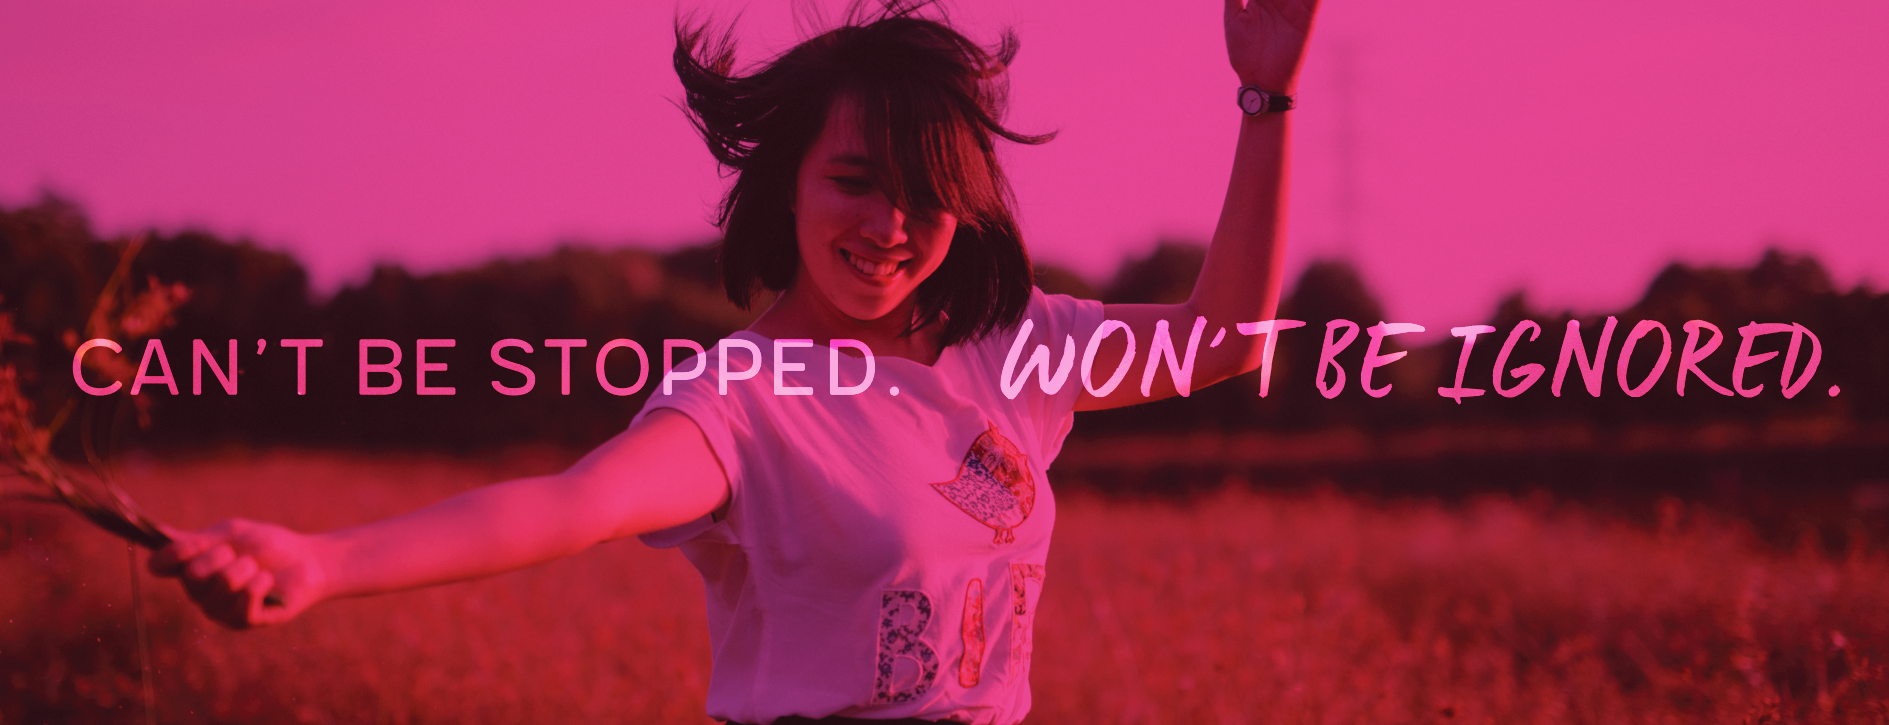 Photograph of girl dancing in a field. Text reads "Can't be stopped. Won't be ignored."